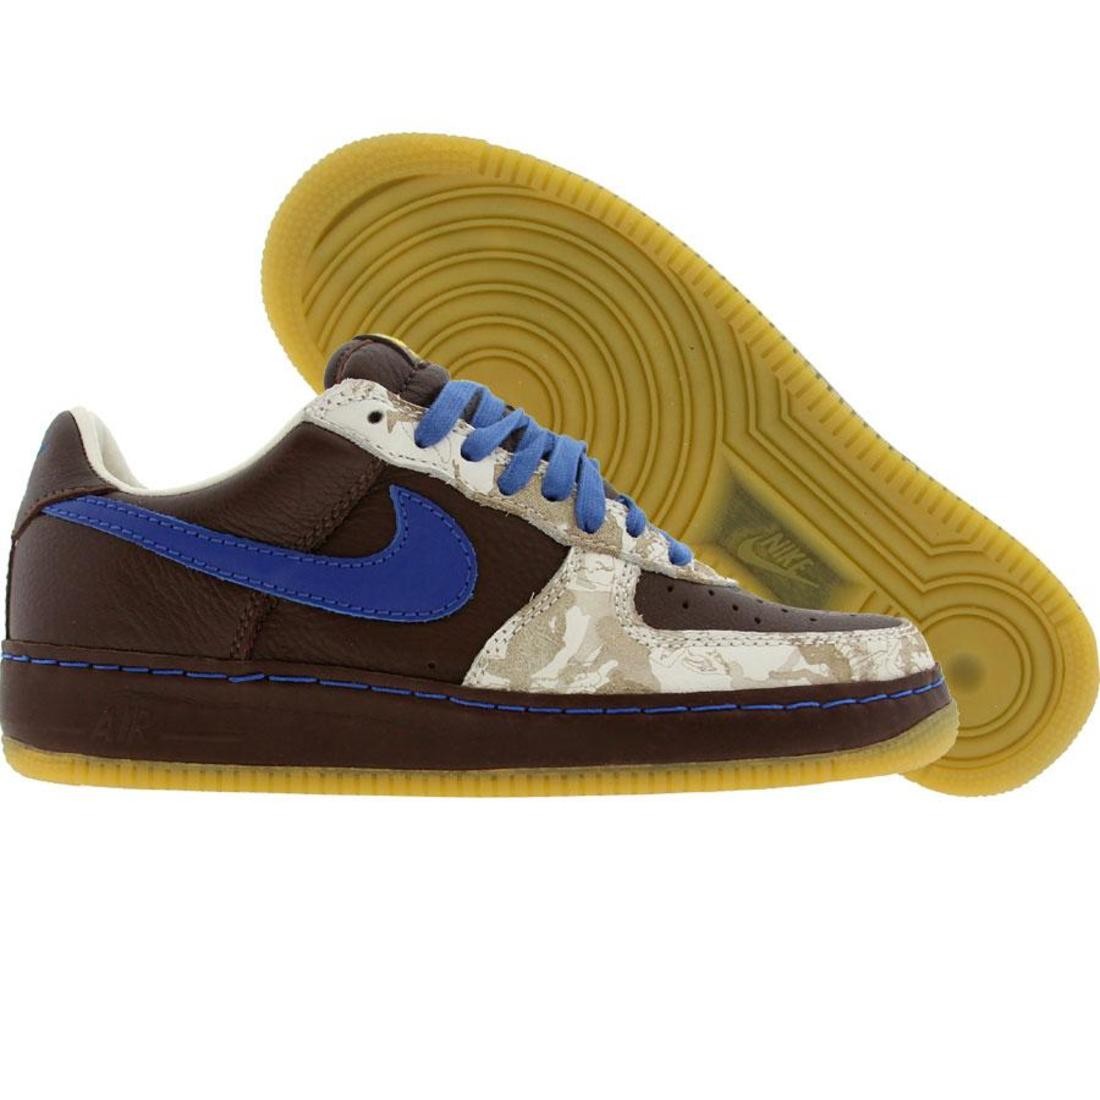 Nike Air Force 1 Low Insideout Edition (barque brown / varsity royal / sail)